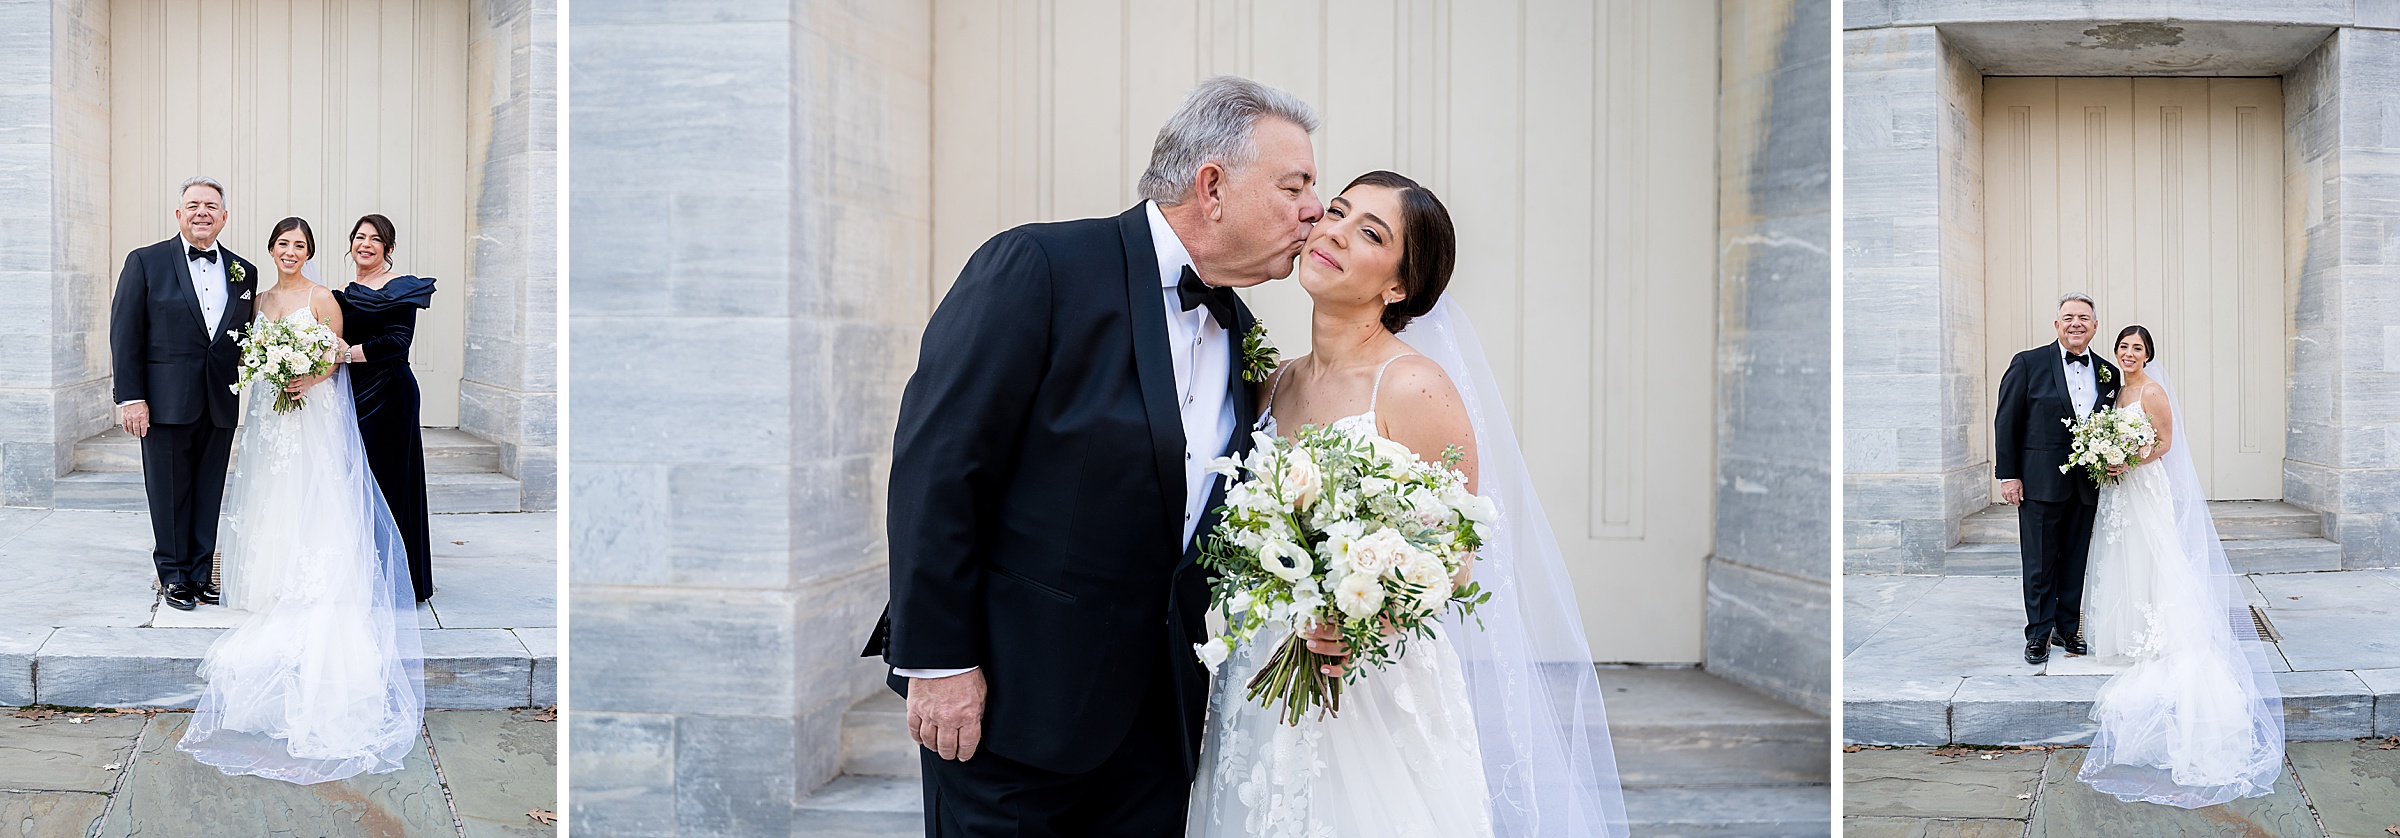 At a Wedding, the bride affectionately kisses her father on the steps.